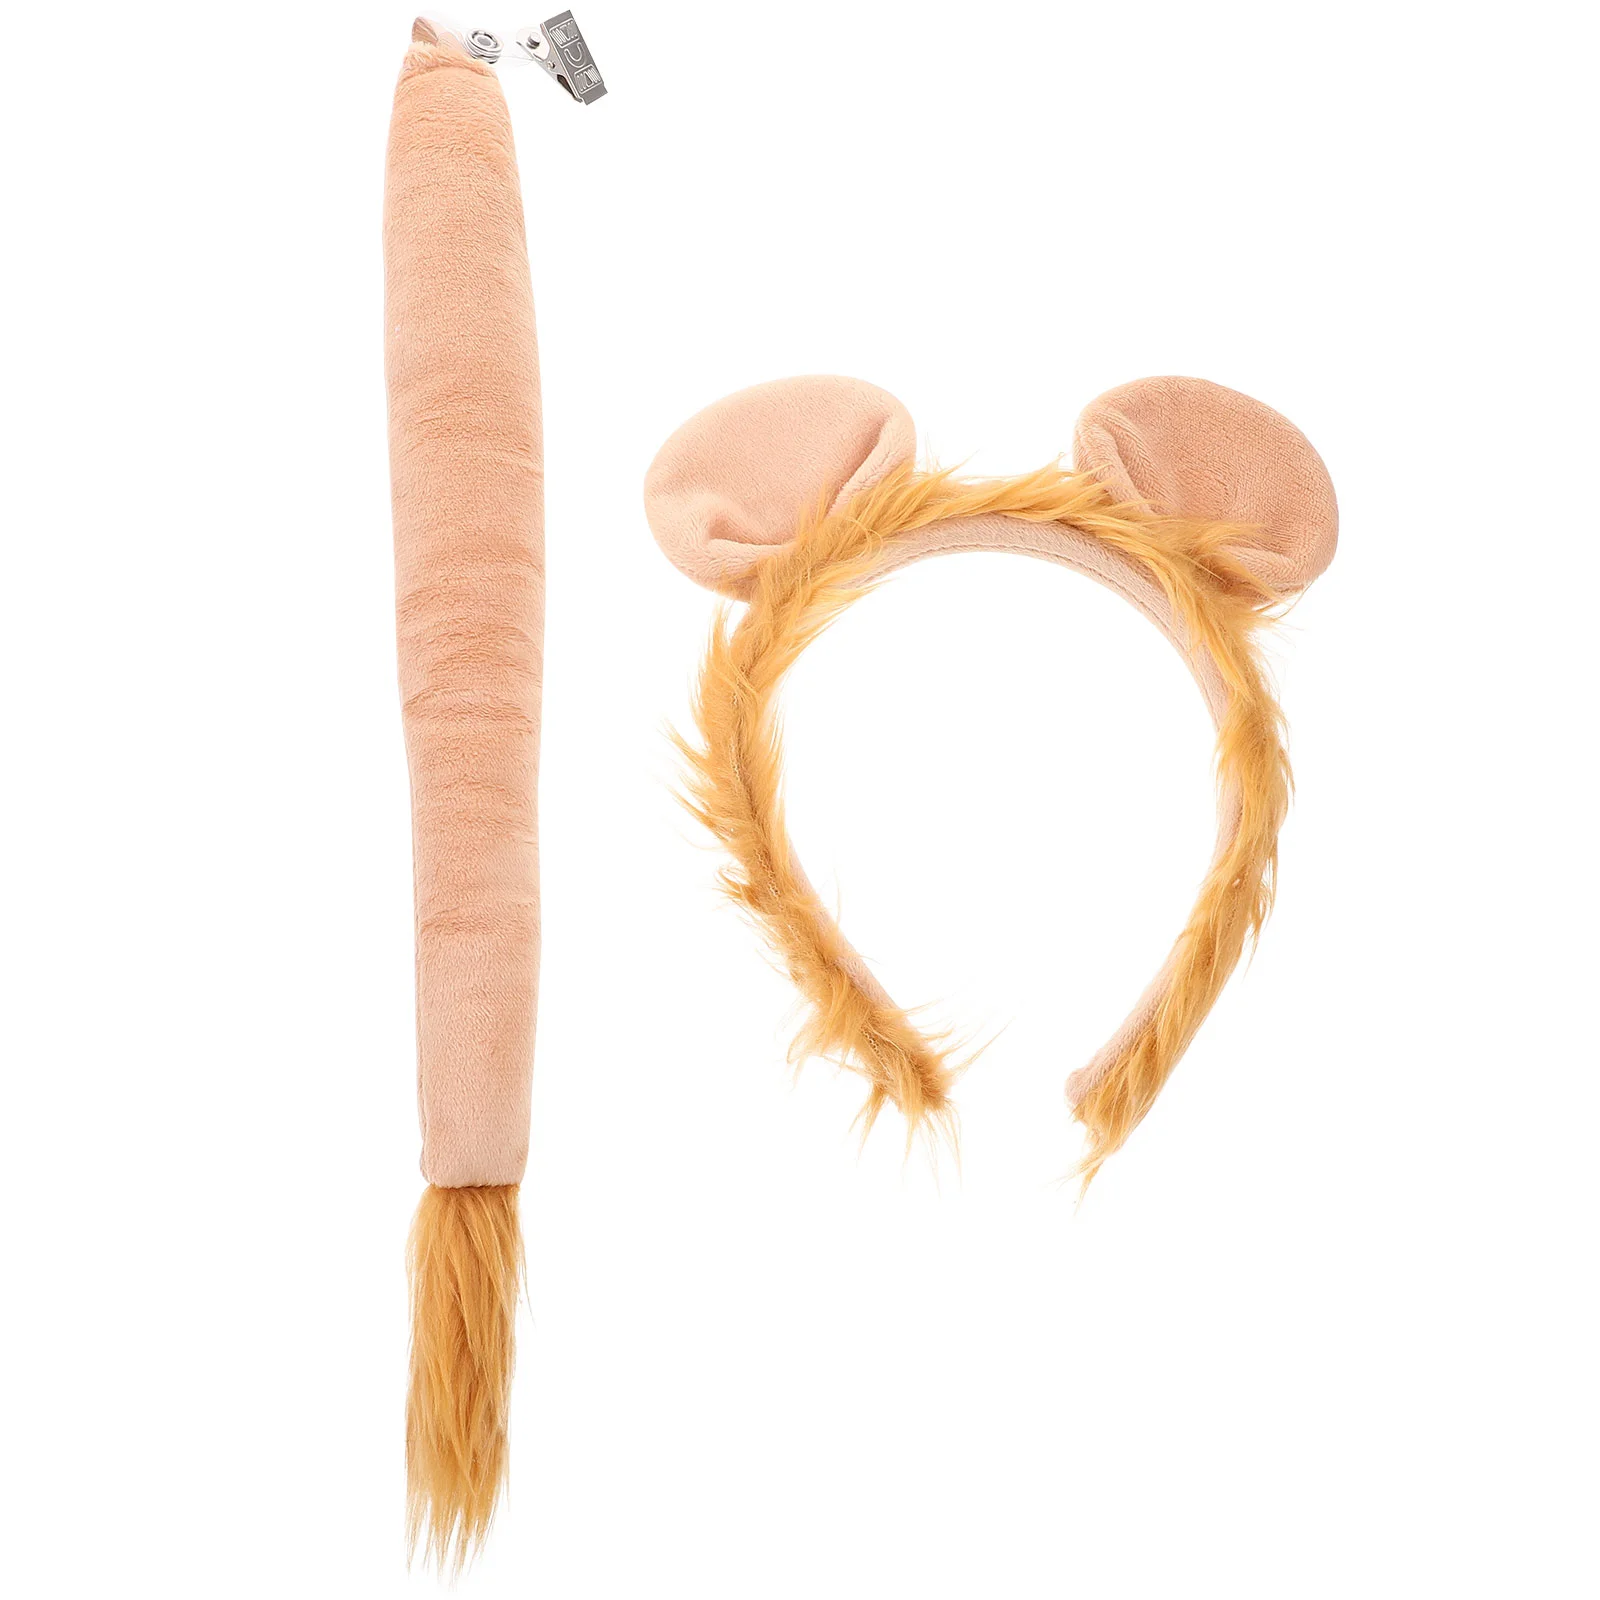 

Lion Headband Set Animals Ear Festival Tail Decor Ears Hairband Party Supply Exquisite Costumes Props Decors Kids Girls Clothes